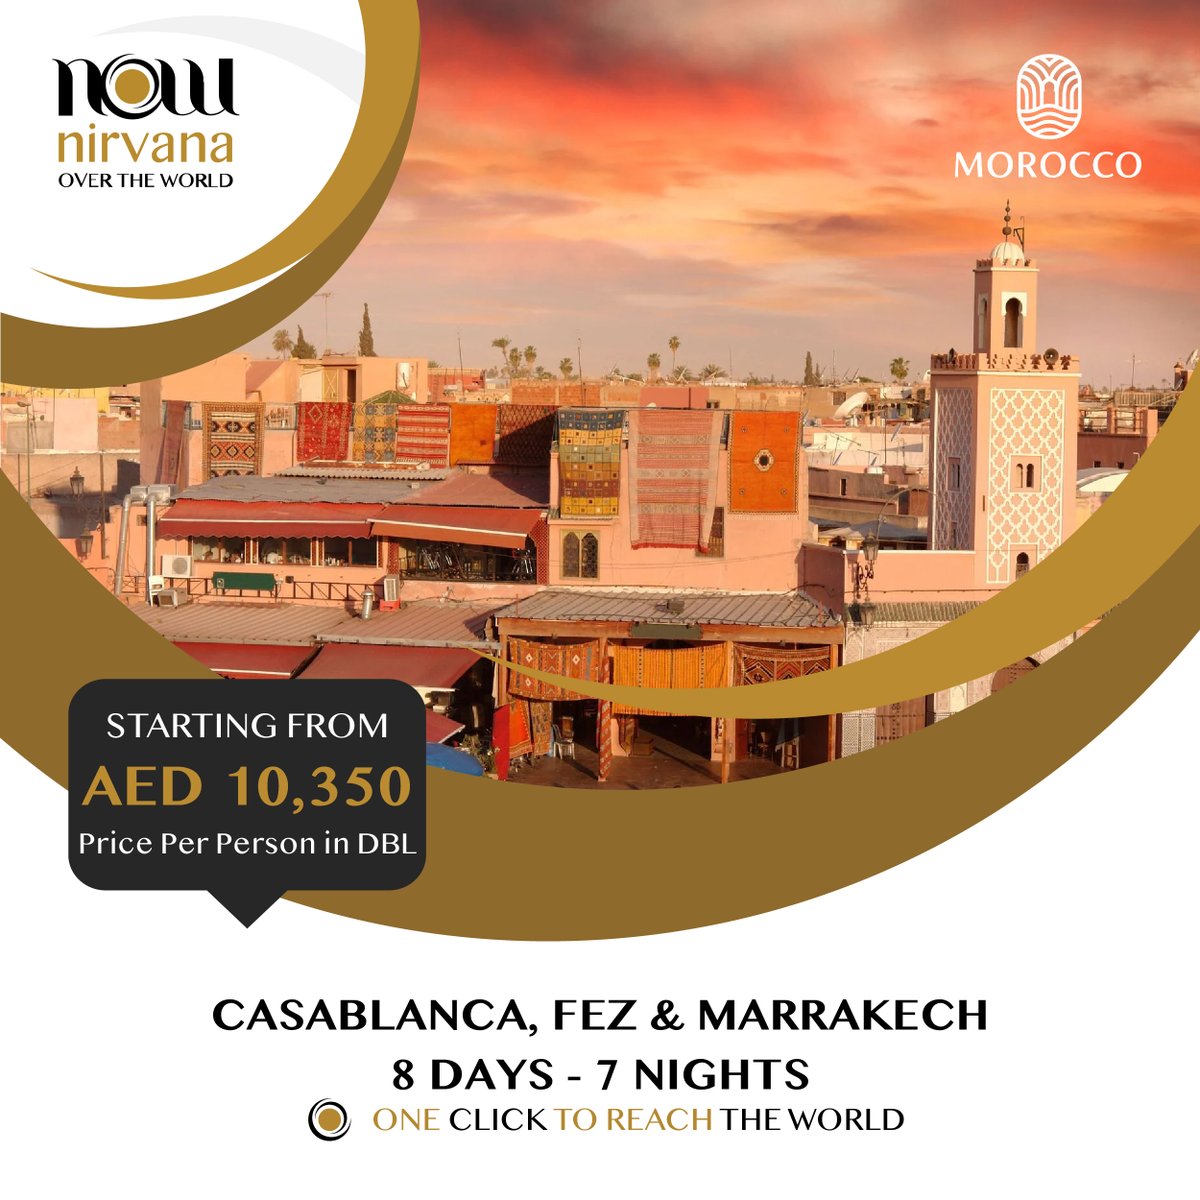 Unveiling Morocco's magic this summer! Explore vibrant souks, majestic deserts, and captivating cities with our exclusive package. 

#Nirvana #NOW #NirvanaOvertheWorld #Travel #Tourism #packages #MoroccoAdventure #SummerEscape